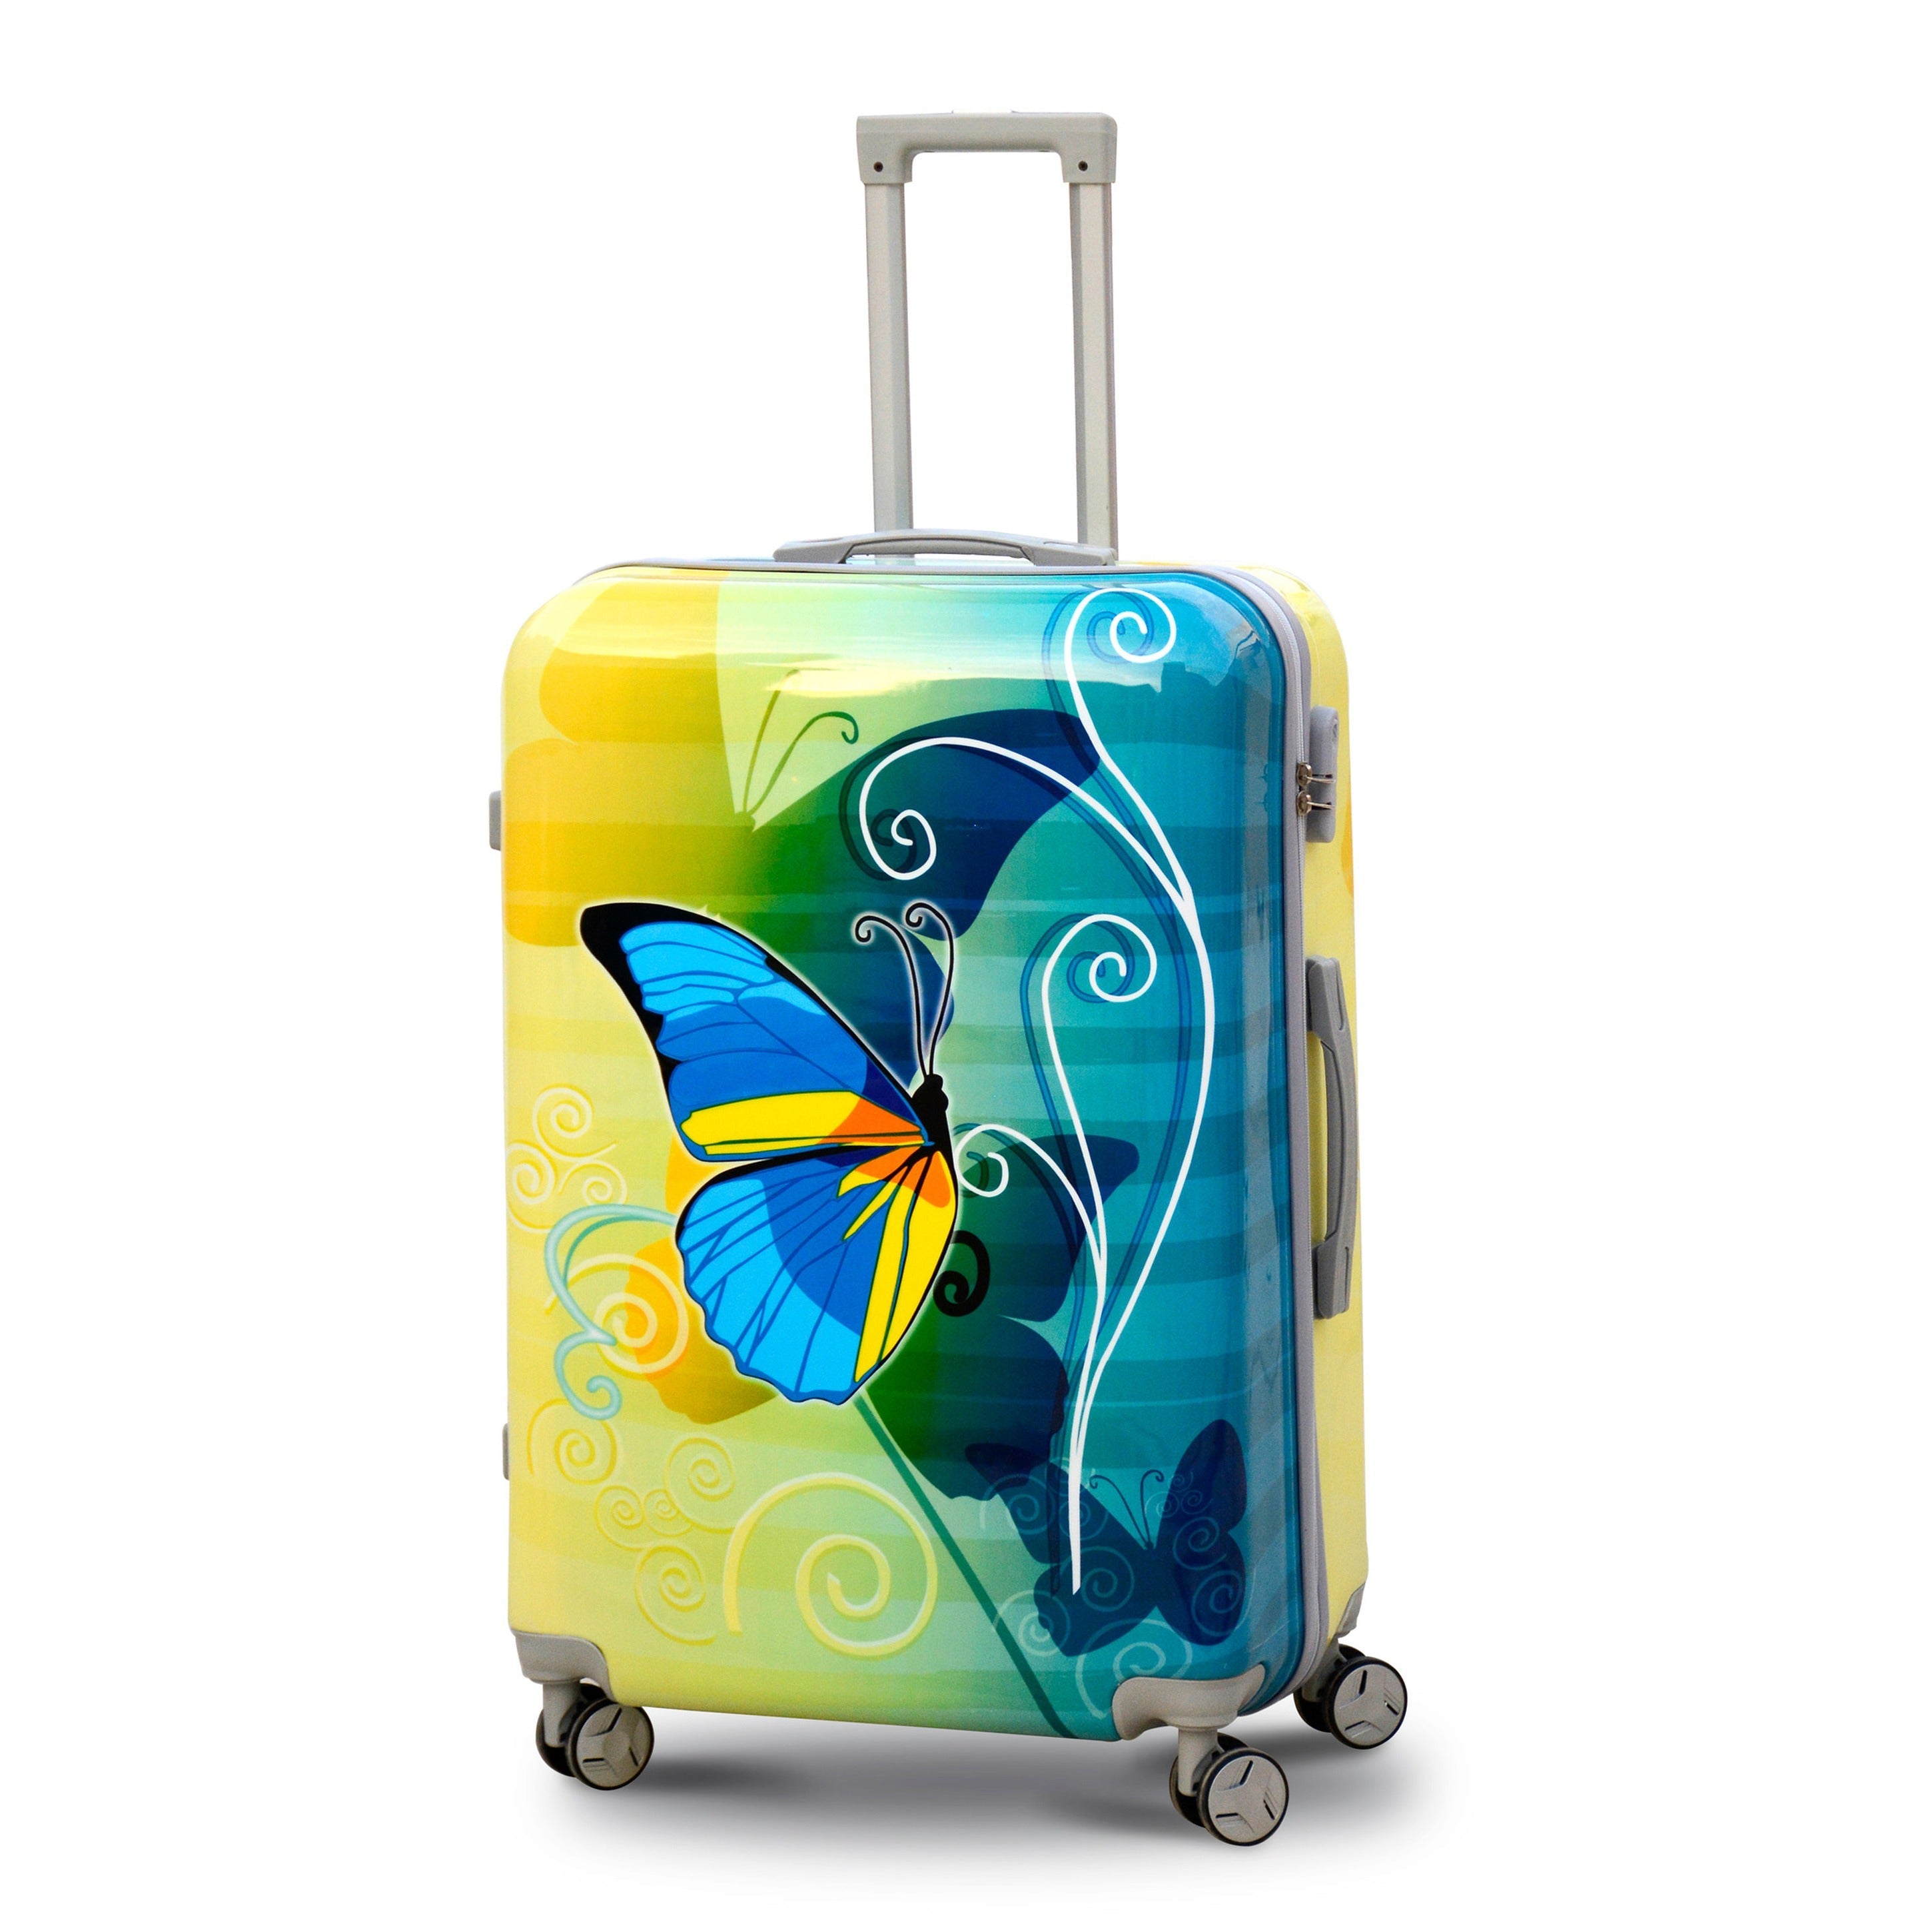 24" Inches Green Colour Printed Butterfly Lightweight ABS Luggage | Hard Case Trolley Bag